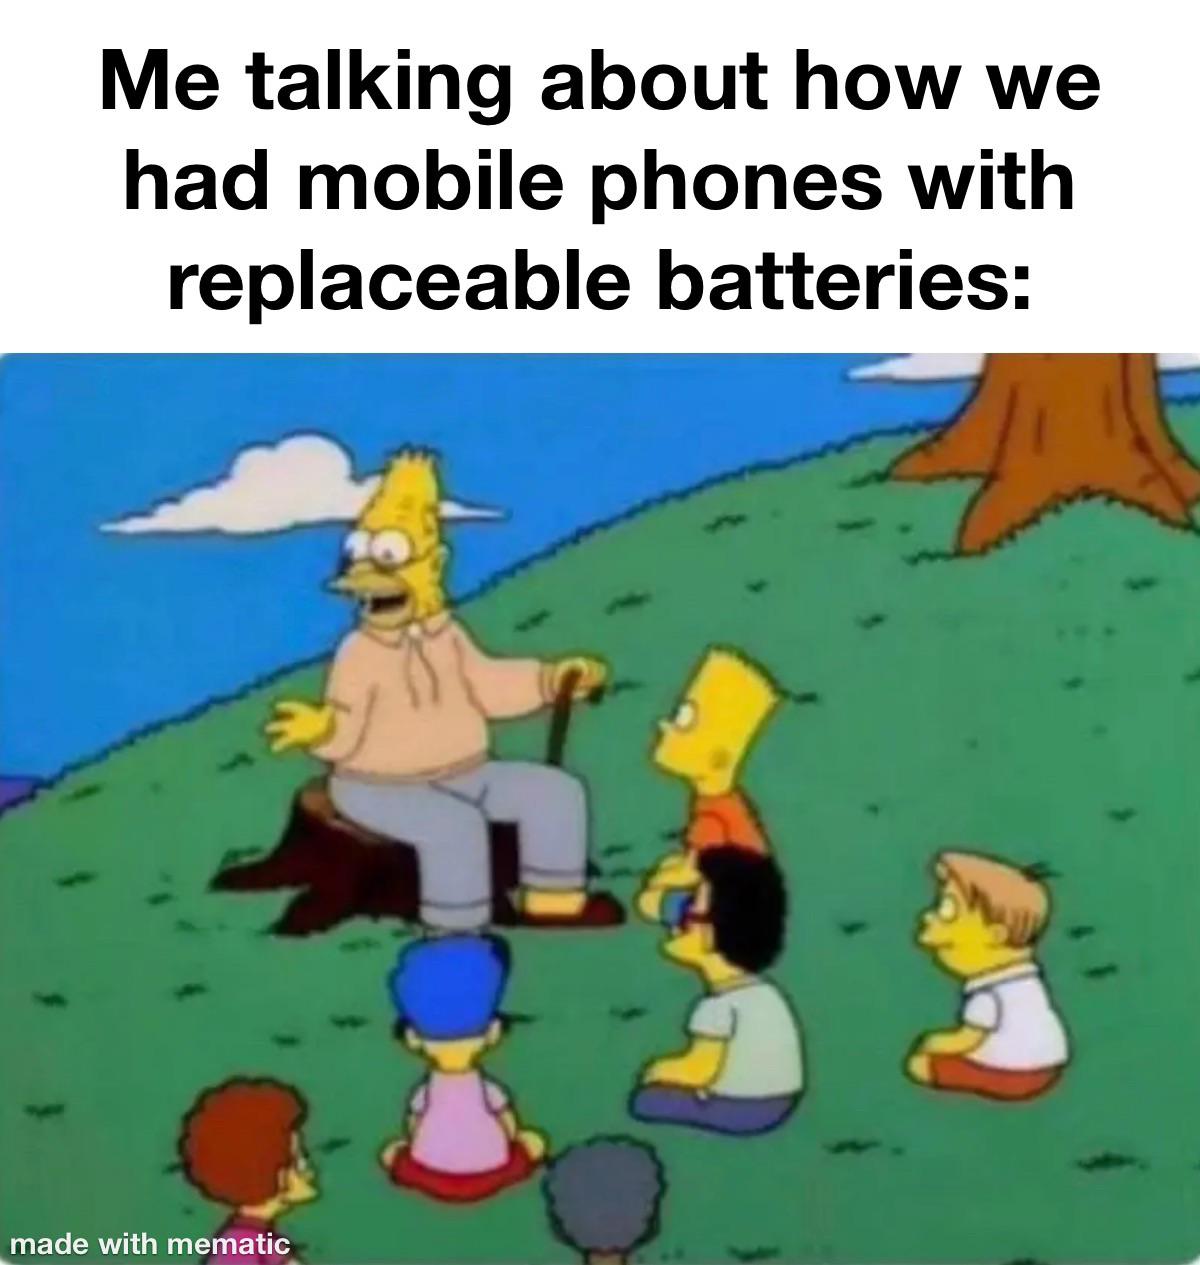 dank memes - gamestop fortune 500 meme - Me talking about how we had mobile phones with replaceable batteries made with mematic